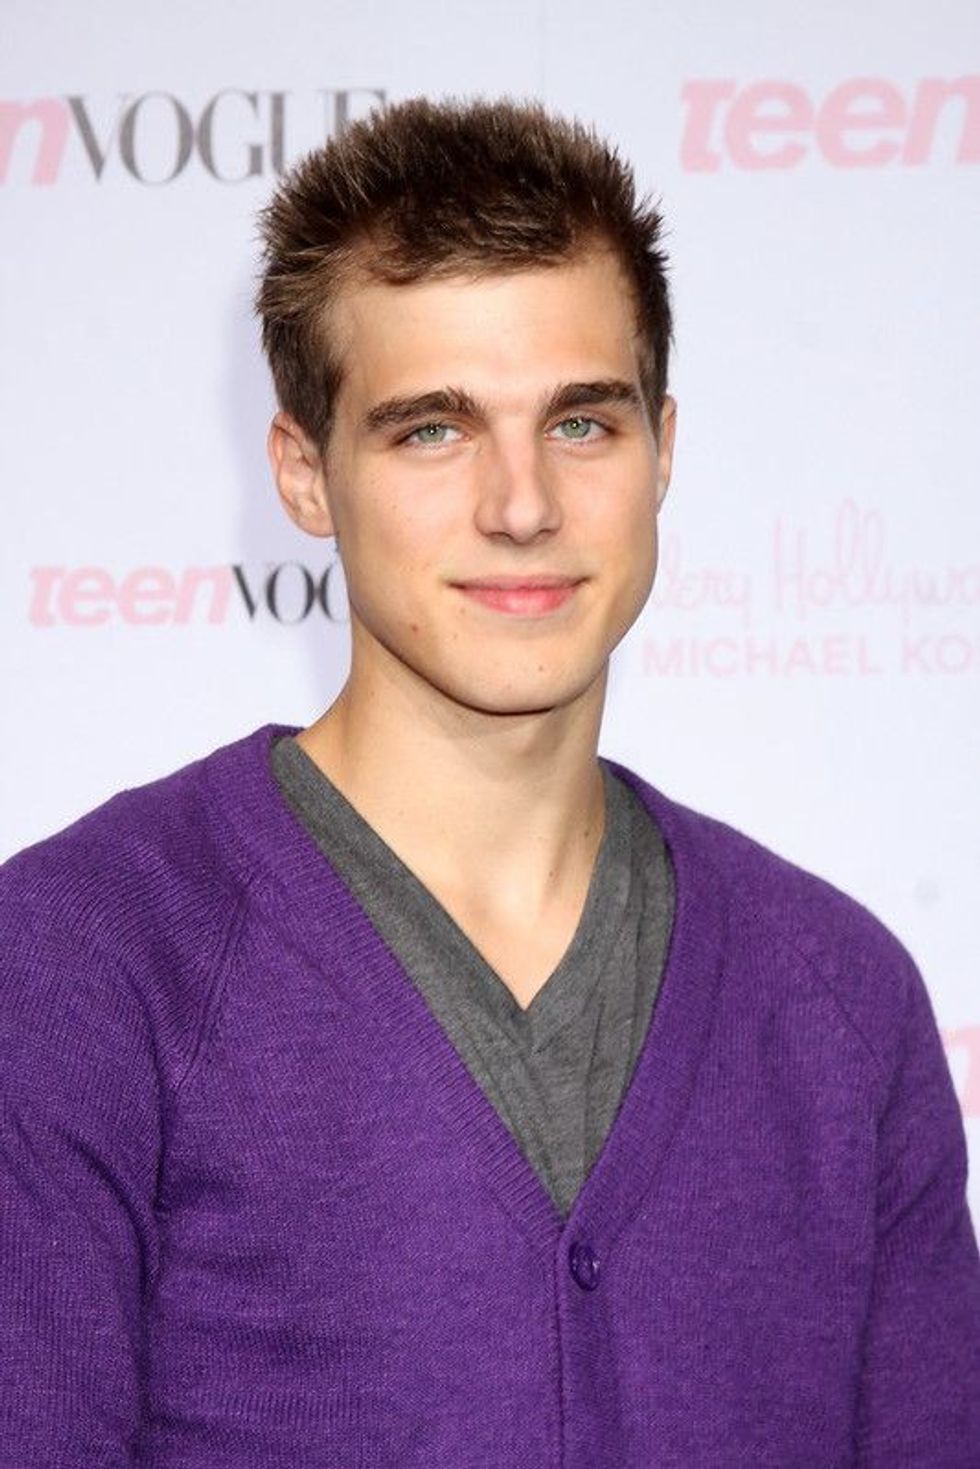 Learn many fun and interesting facts about Cody Linley in this article. Know more about his birthday and net worth.